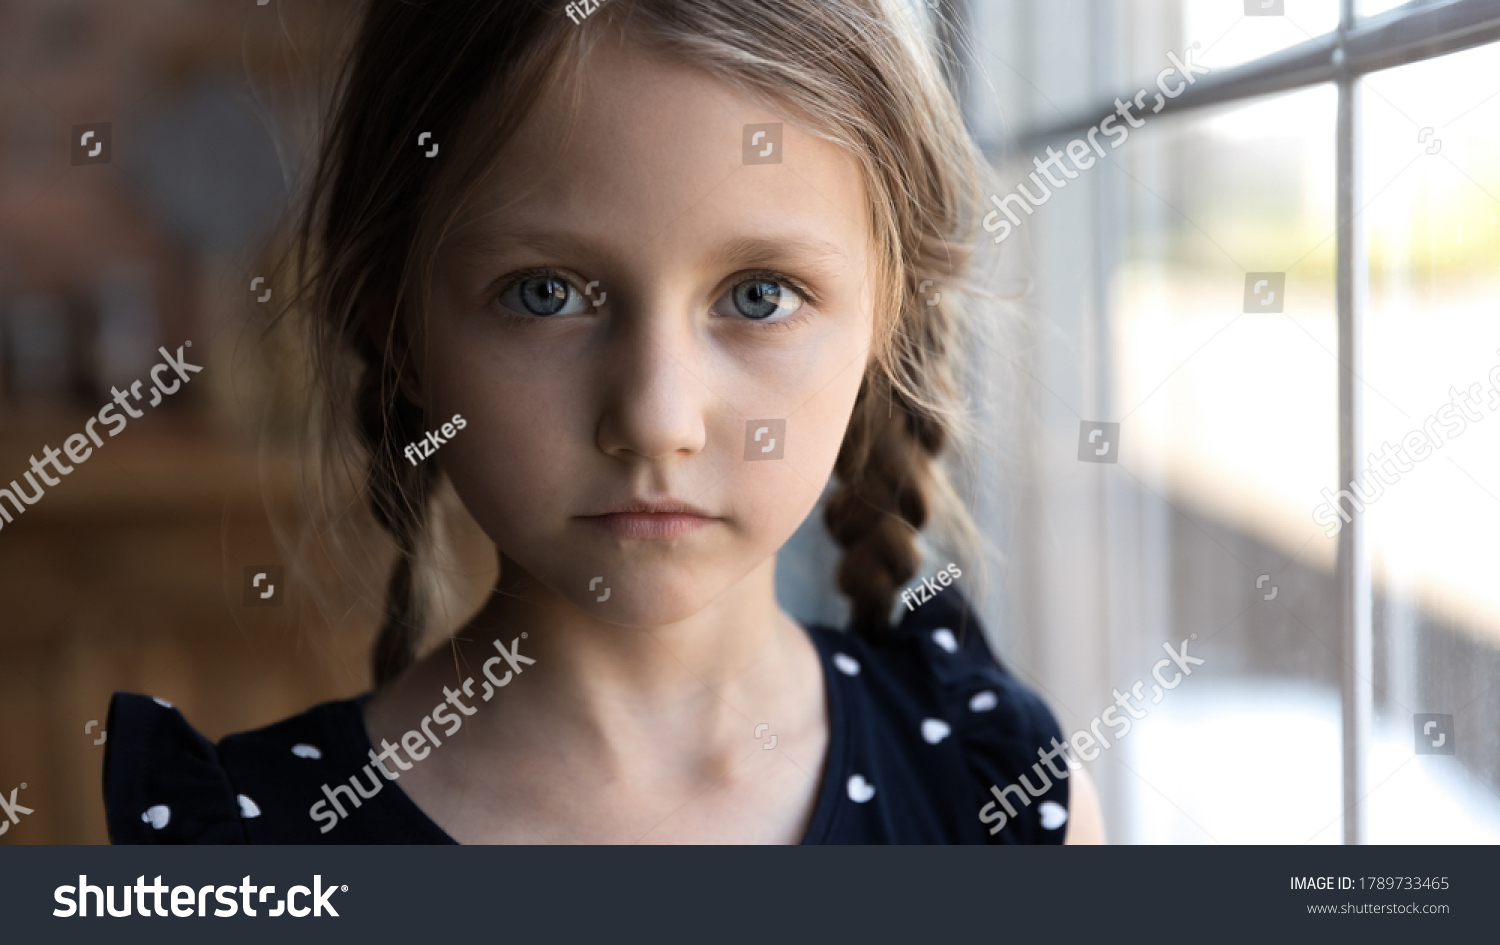 Crop close up portrait of serious sad little Caucasian girl look at camera, unhappy small child kid orphan feel lonely abandoned, outcast or loner miss parents, children drama, volunteer concept #1789733465